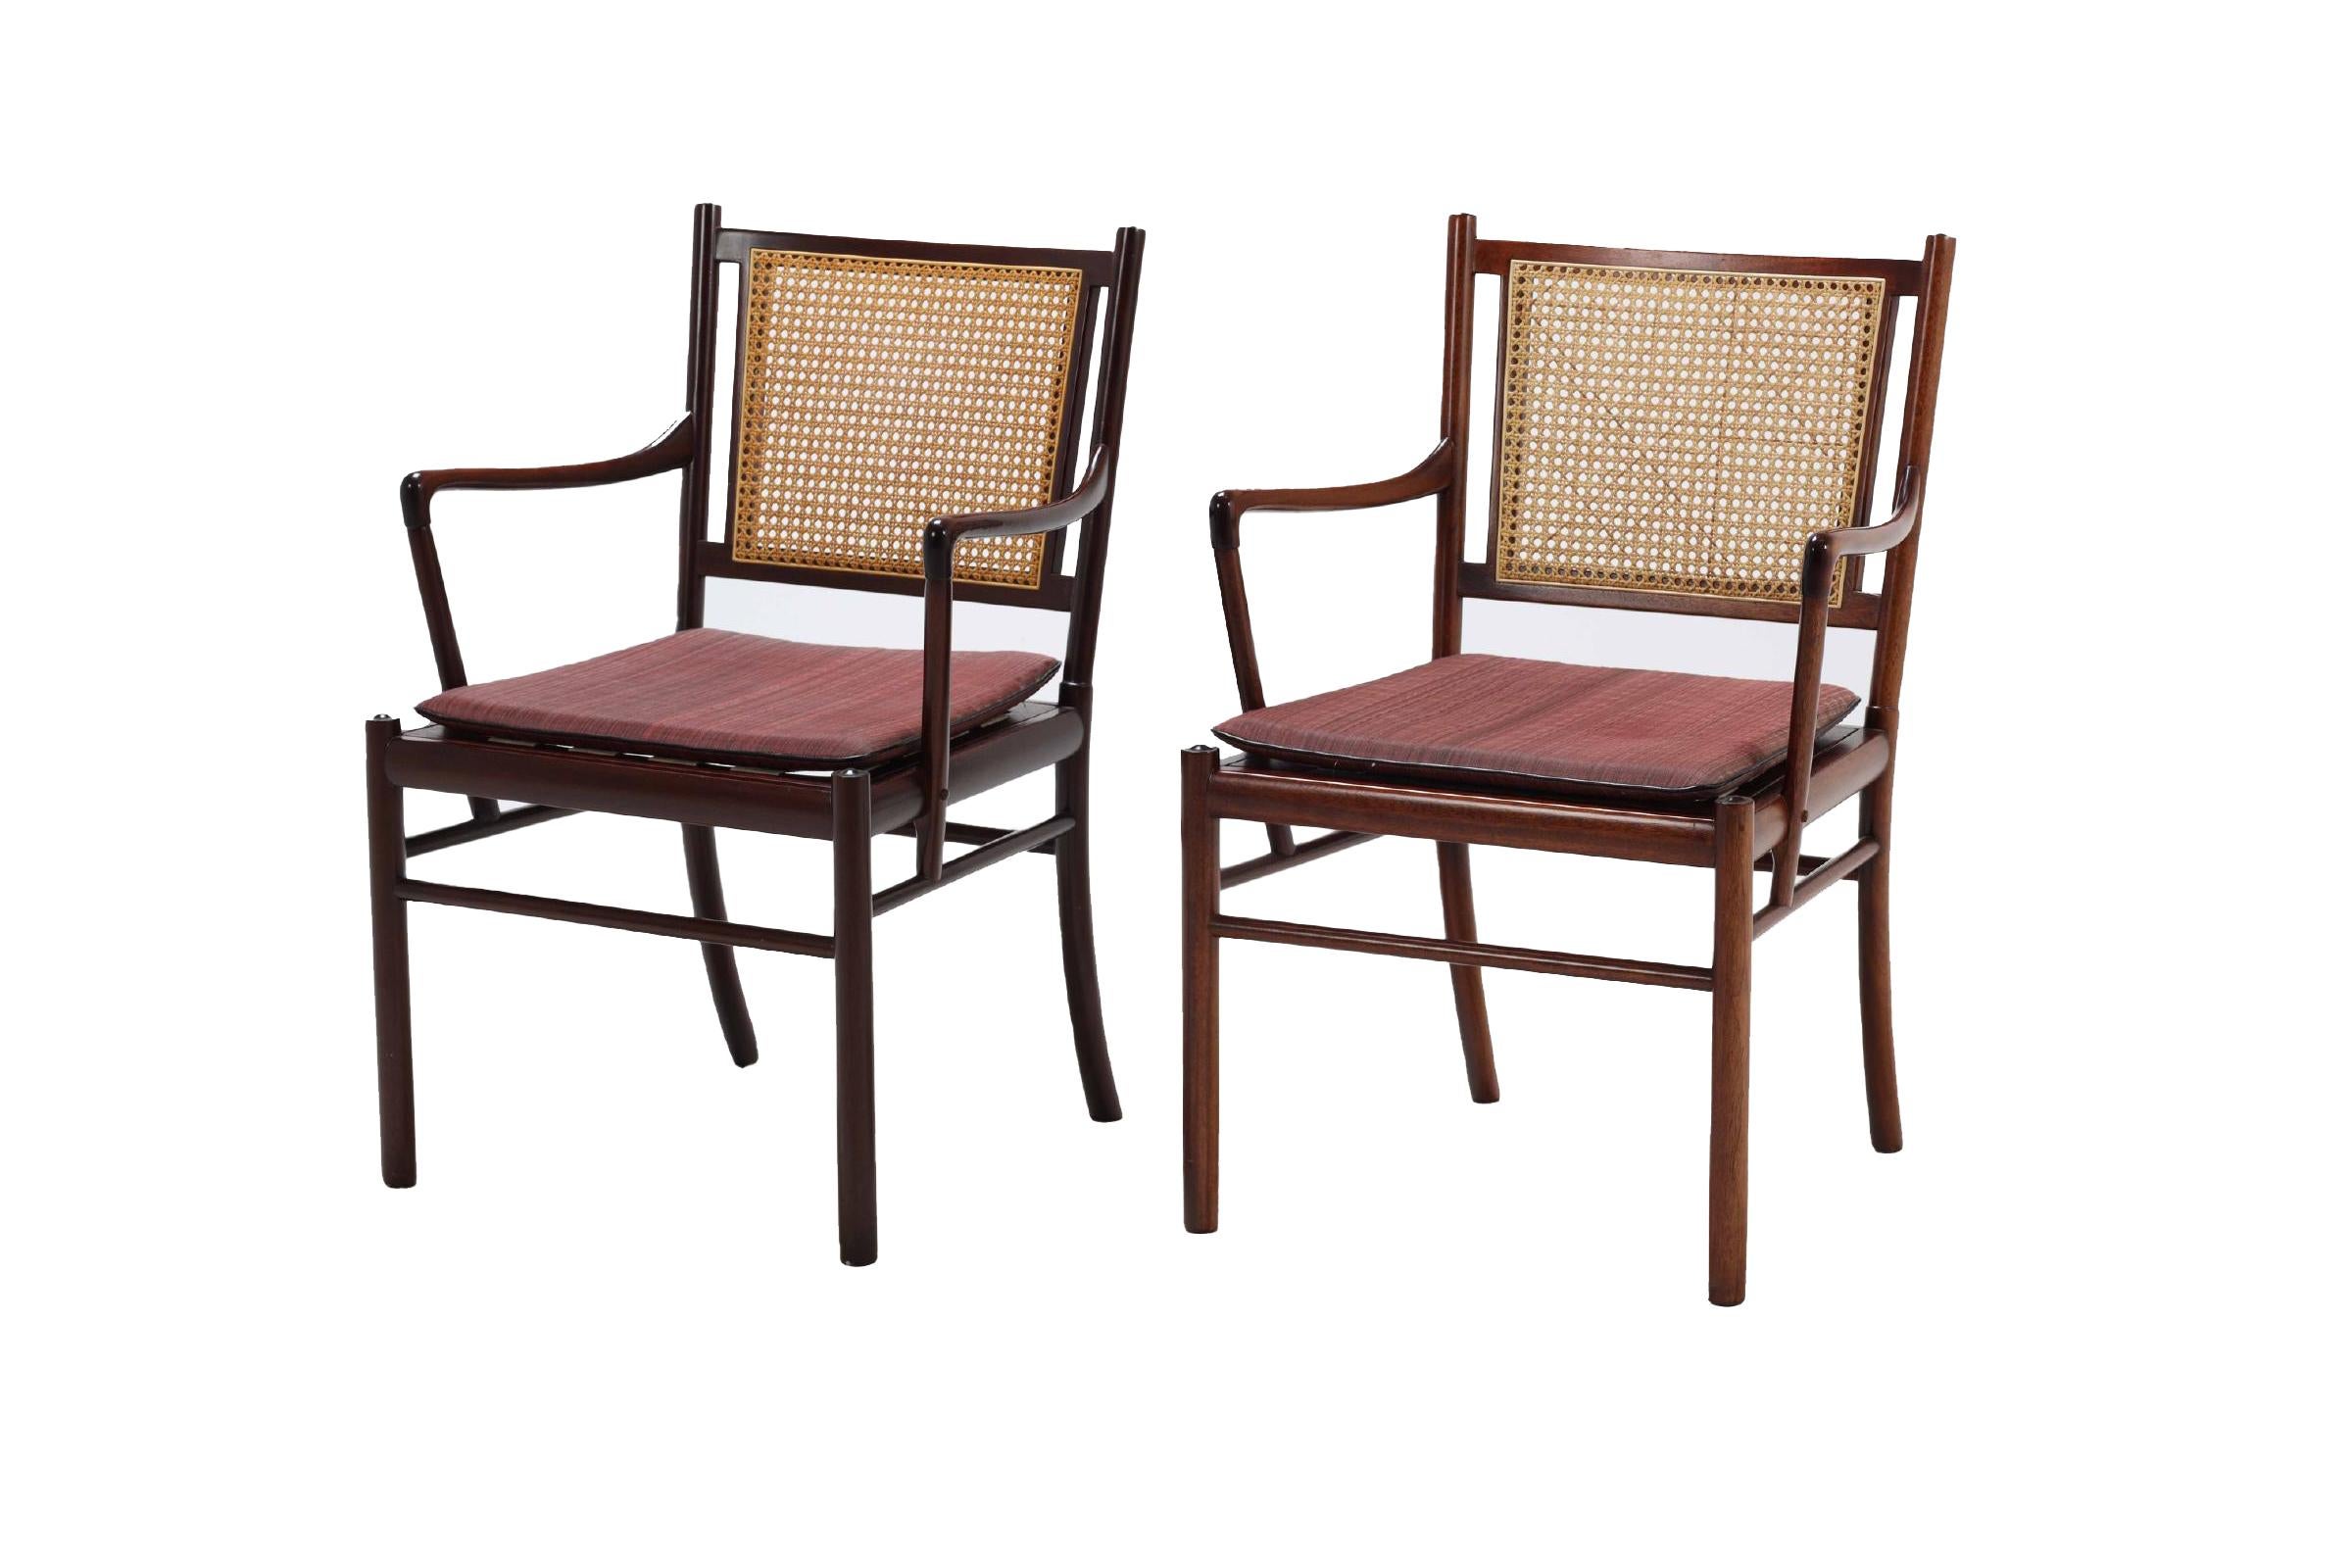 Pair of ‘Colonial’ armchairs, model PJ301 in mahogany, cane and original fabric. Elegant pair easy chairs with a mahogany slim frame by the Danish designer Ole Wanscher. These chairs show the great craftsmanship and attention to detail that Ole